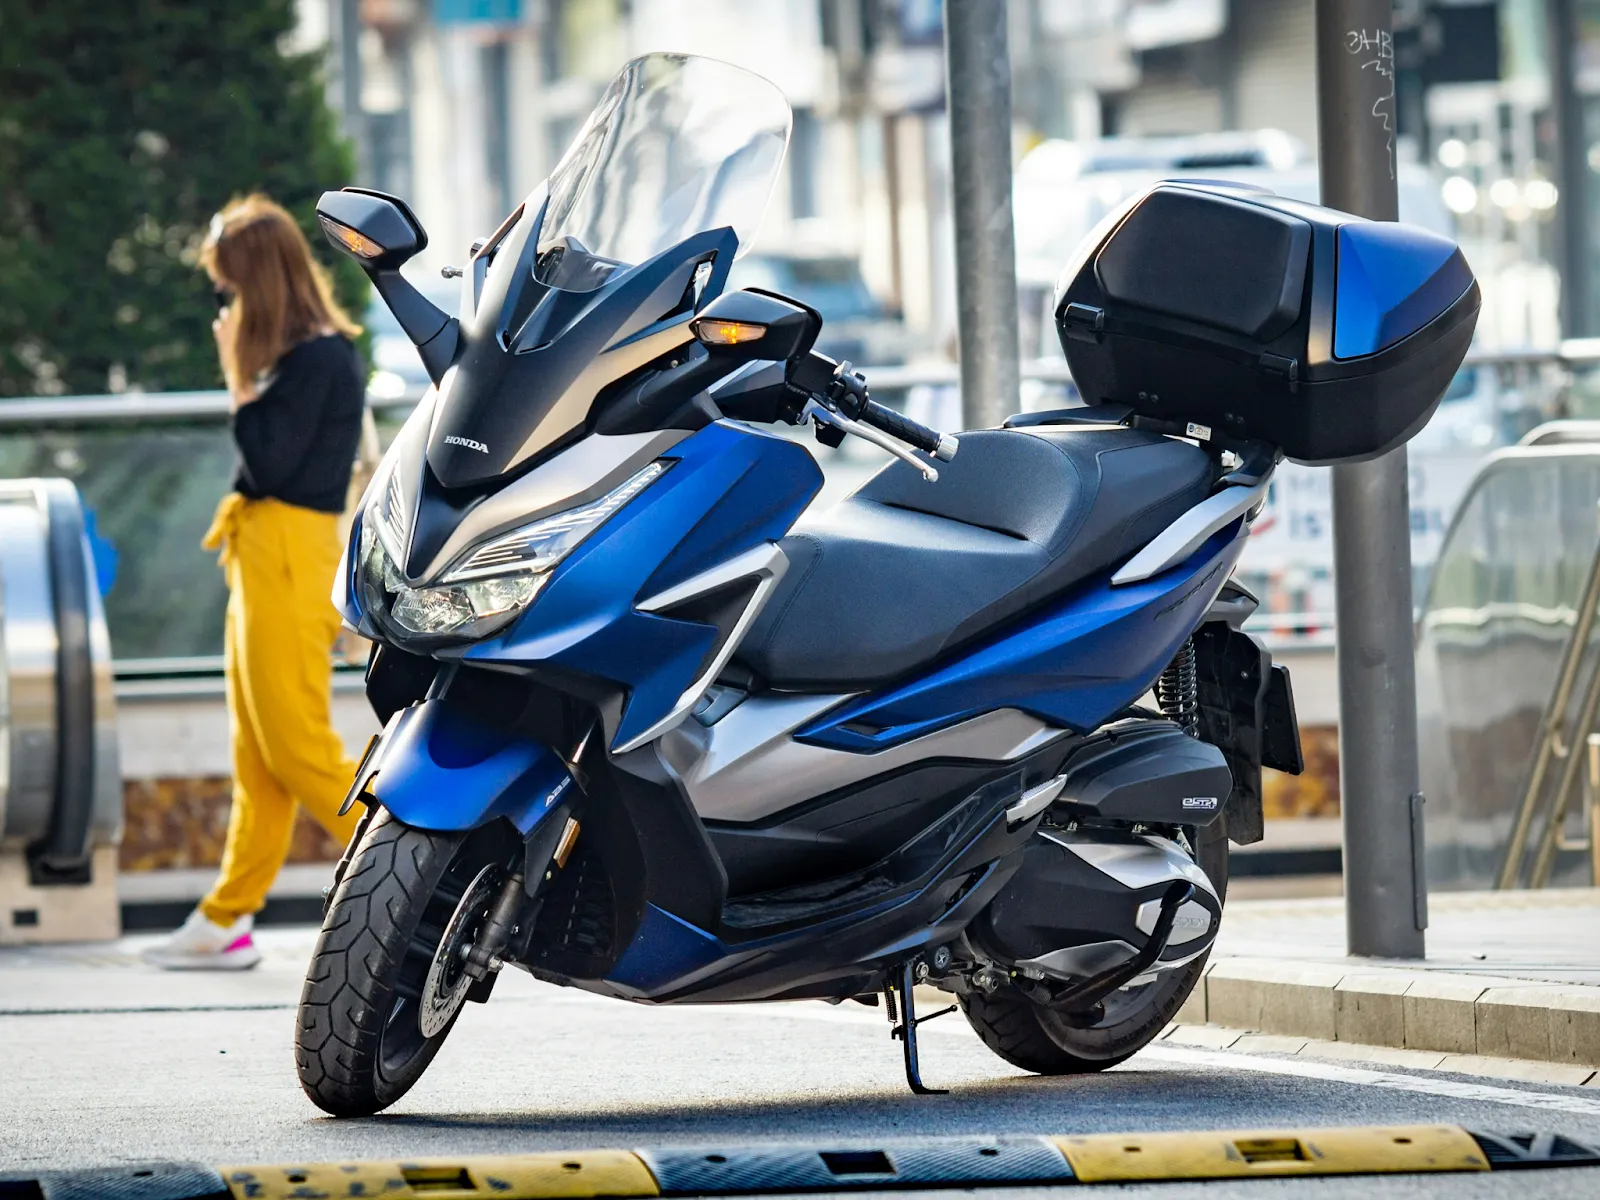 A blue and black Honda scooter parked along the road